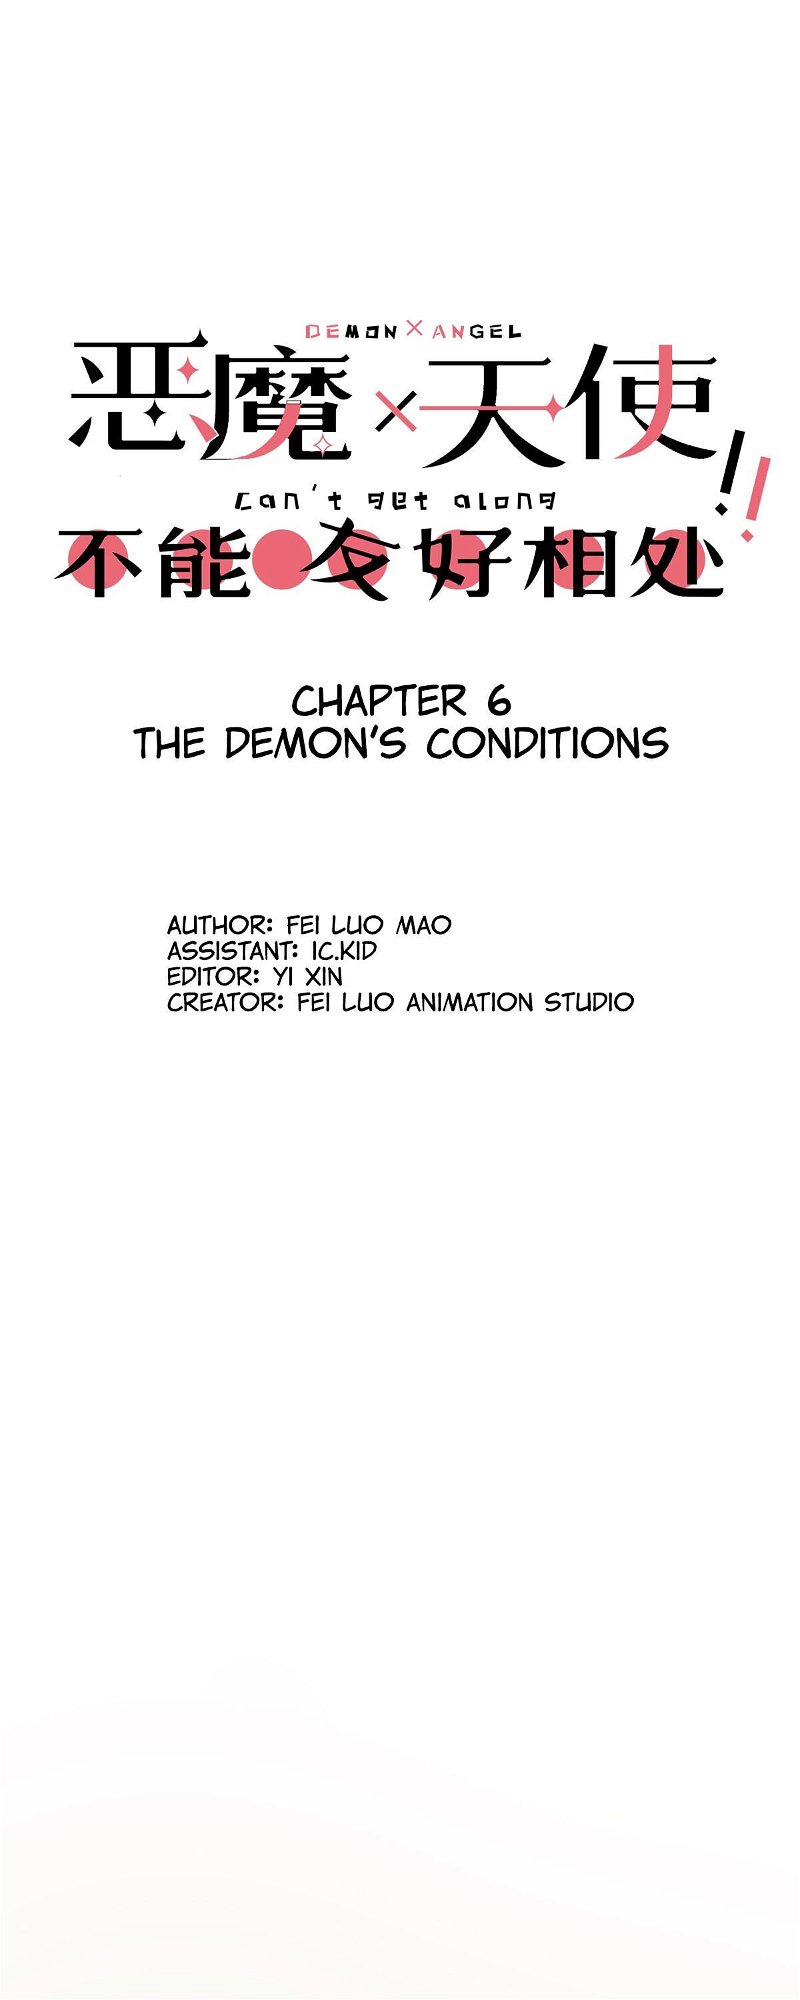 Demon X Angel, Can’t Get Along! Chapter 6 - Page 0